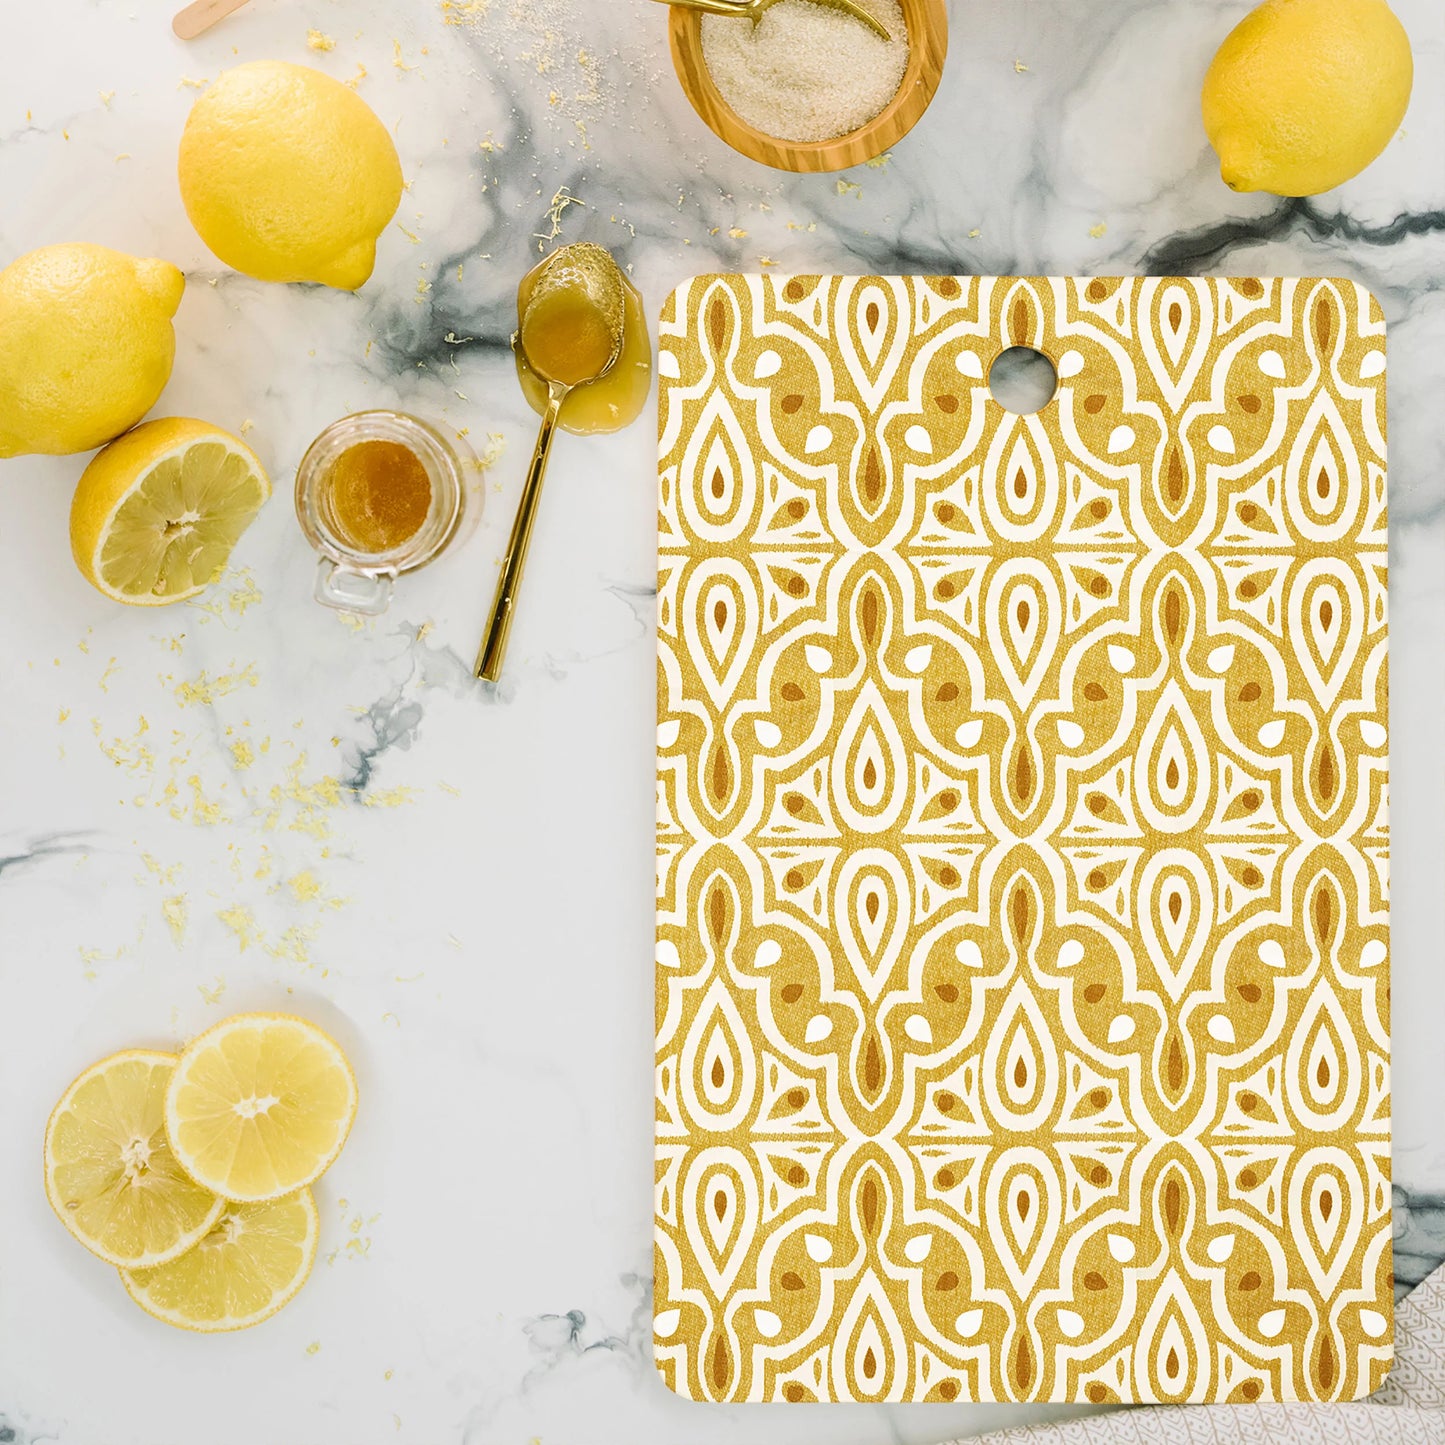 Broderie Goldenrod Bamboo Cutting Board